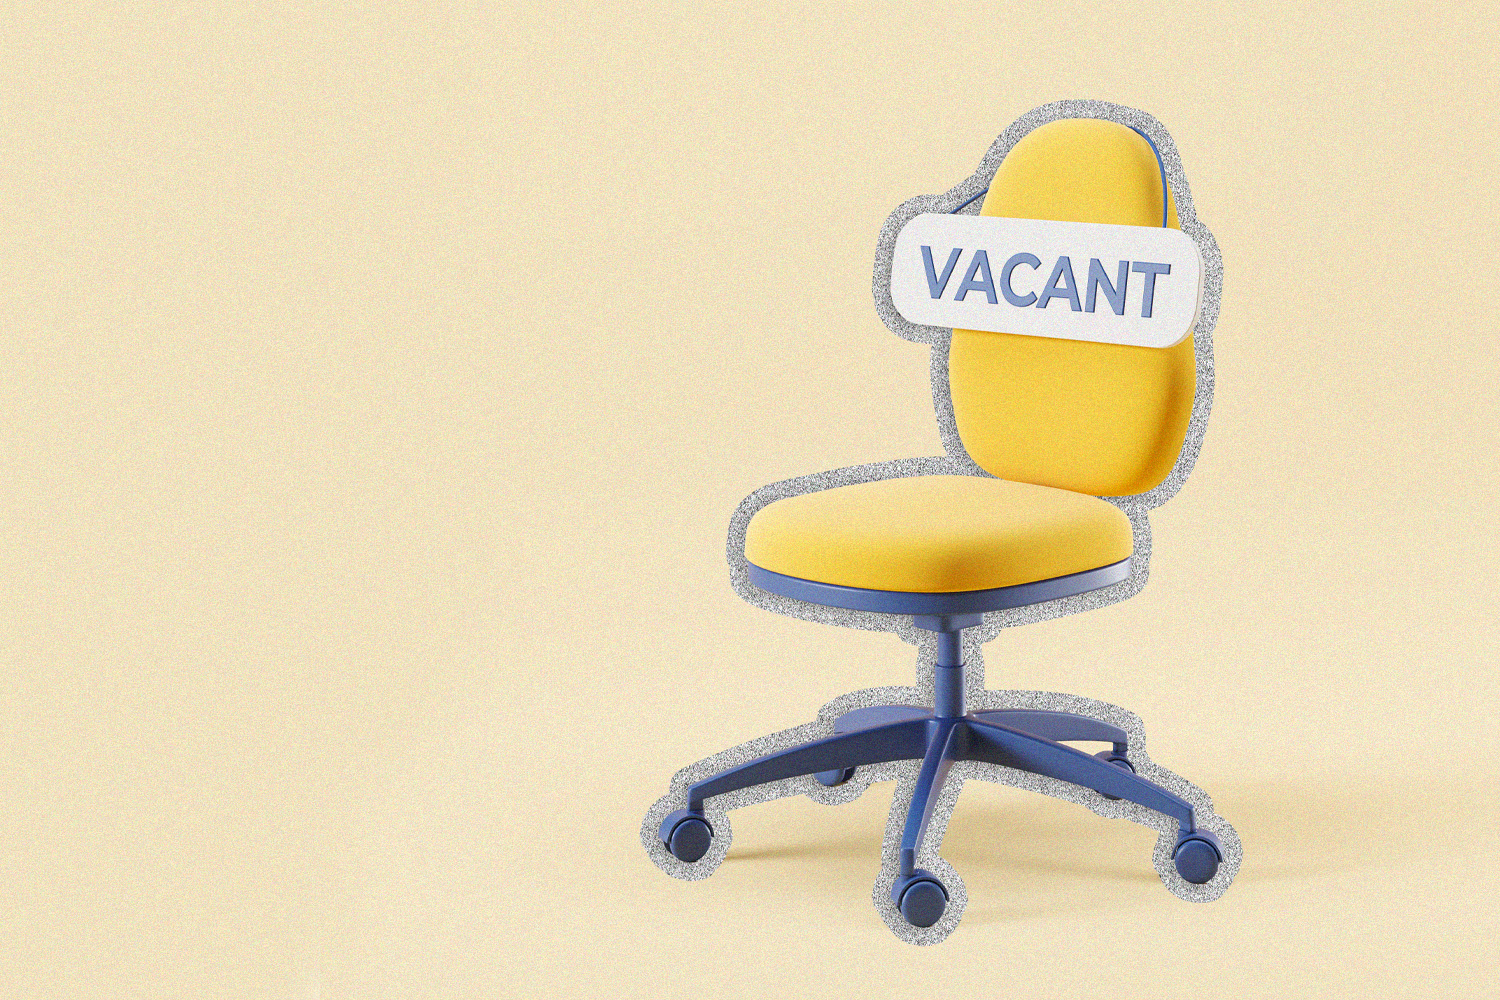 An empty desk chair with a "vacant" sign on it.